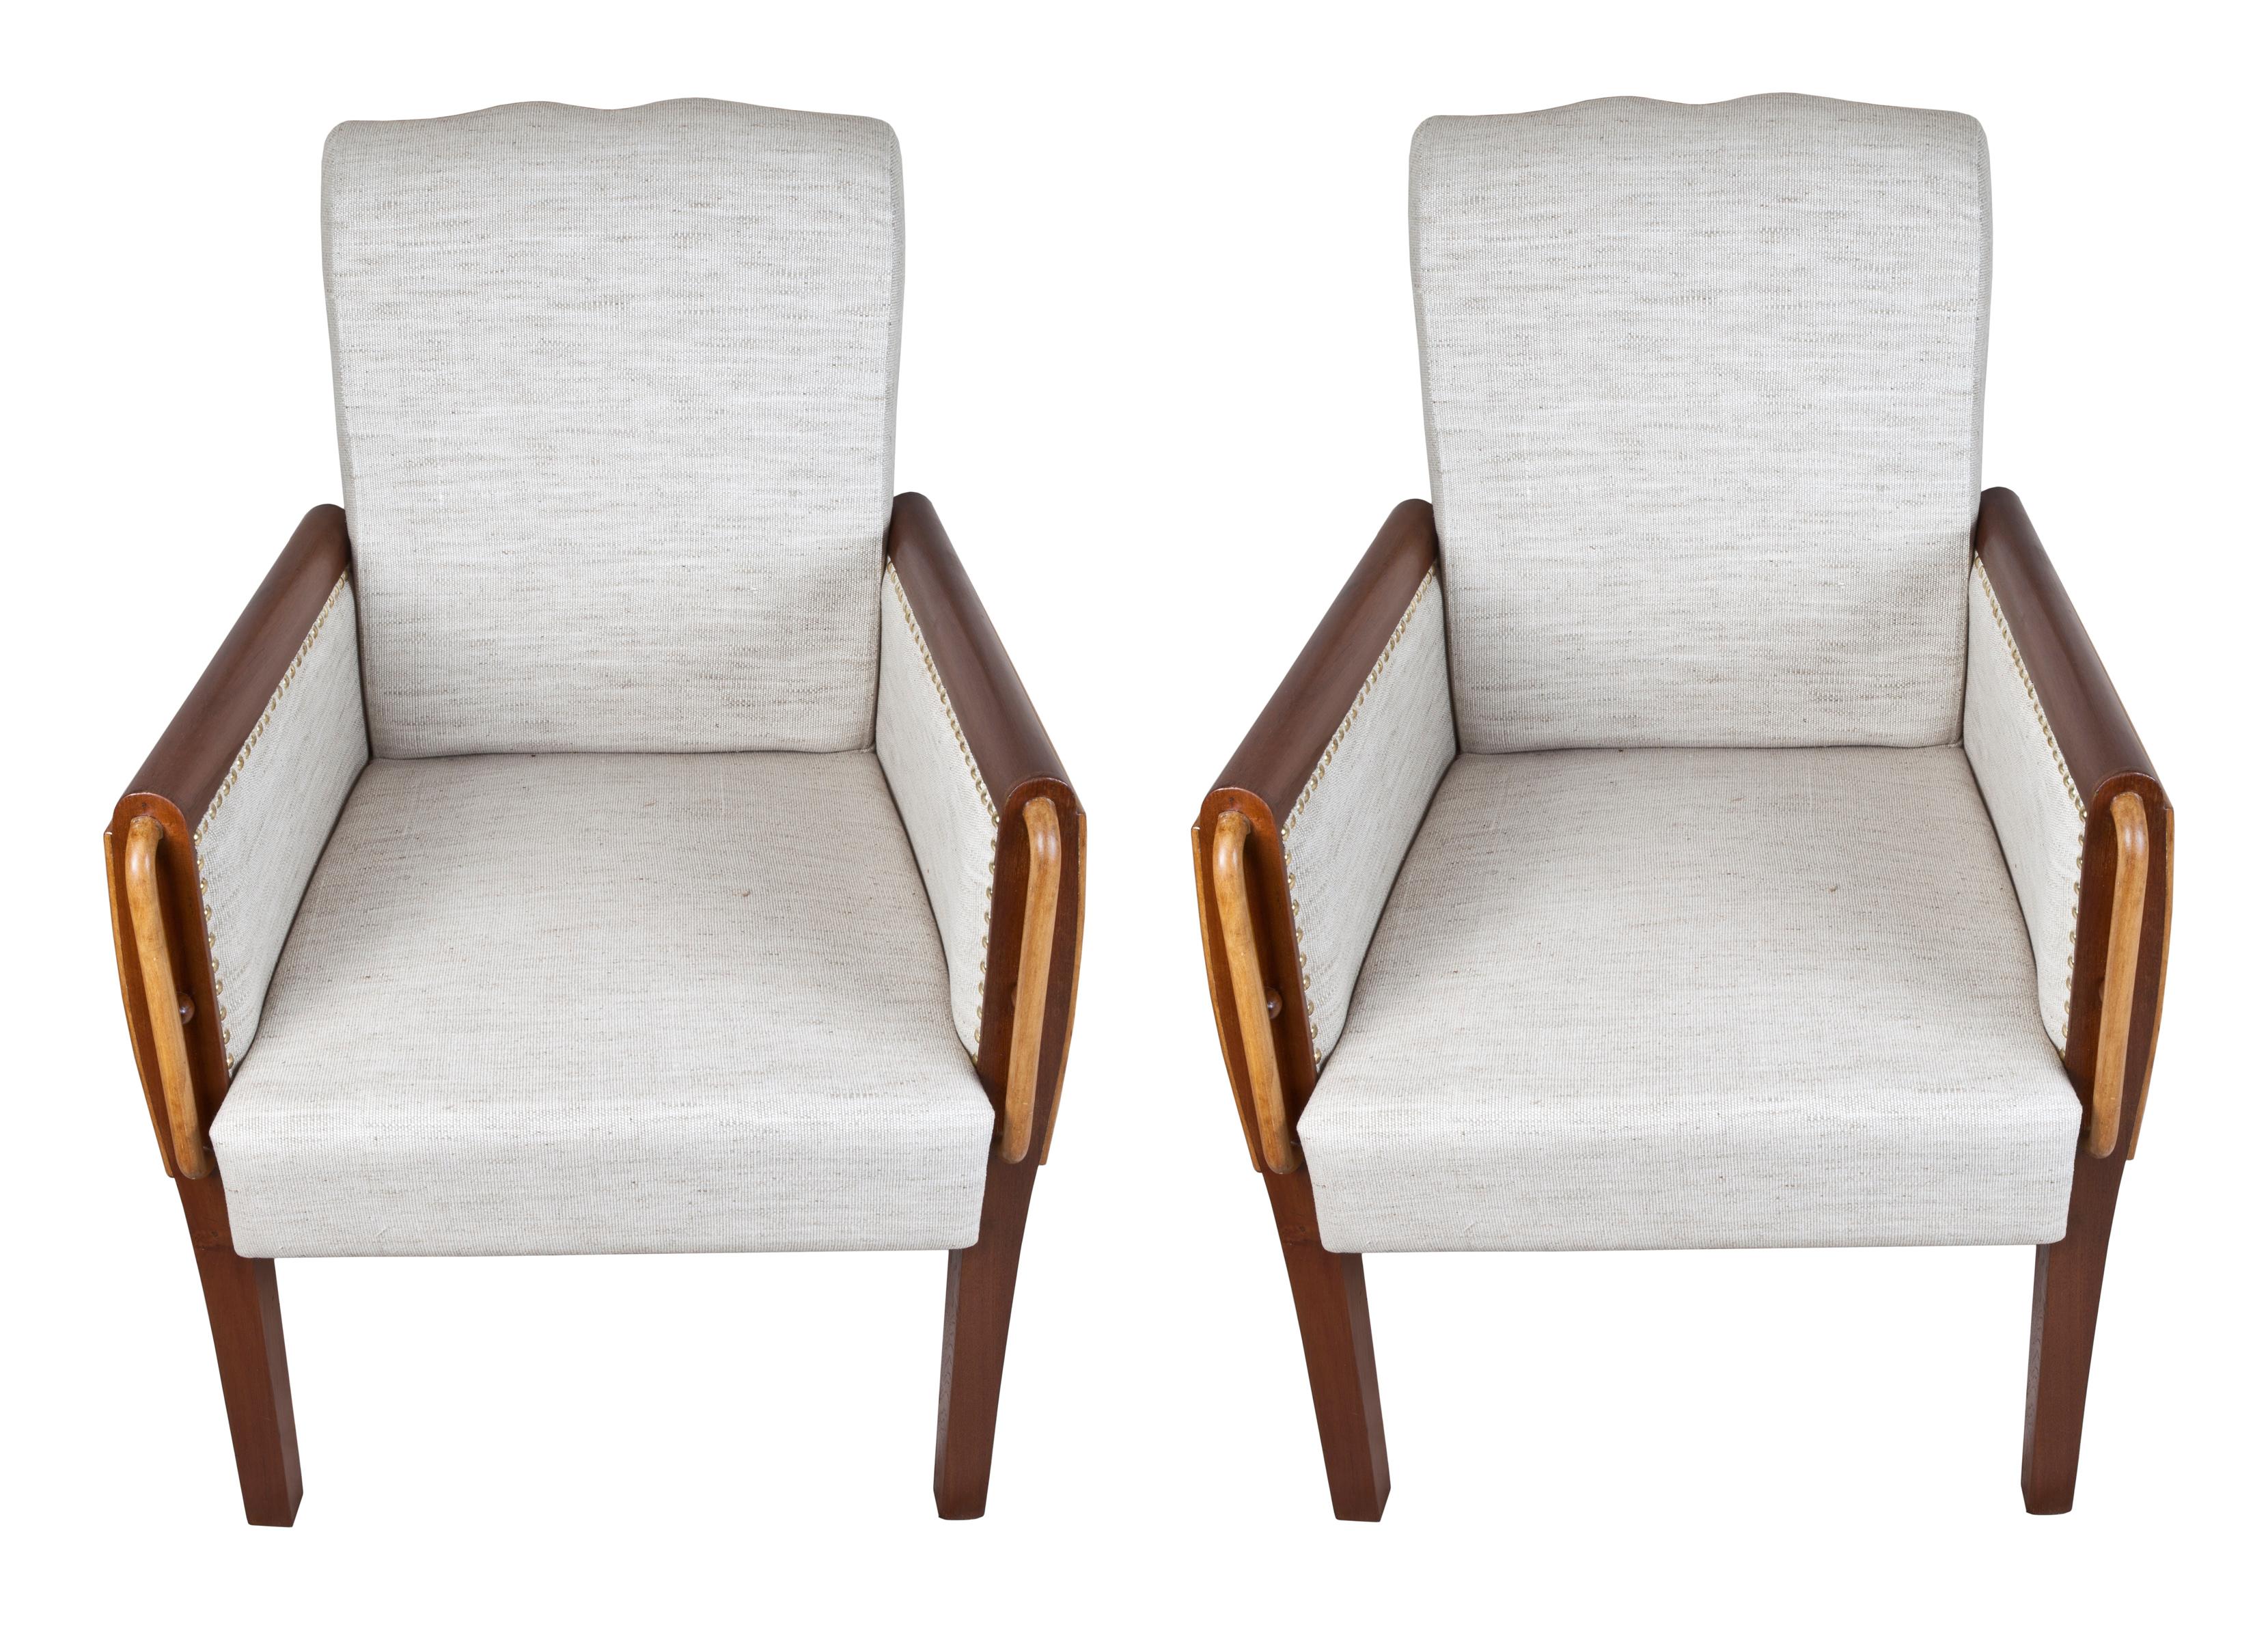 A pair of Mid-Century Modern teak and satinwood arm chairs. Great style and design. Sides and legs are teak with reeded satinwood detailing on the sides and the front rods are satinwood as well. Reupholstered in an oatmeal, textured silk linen with